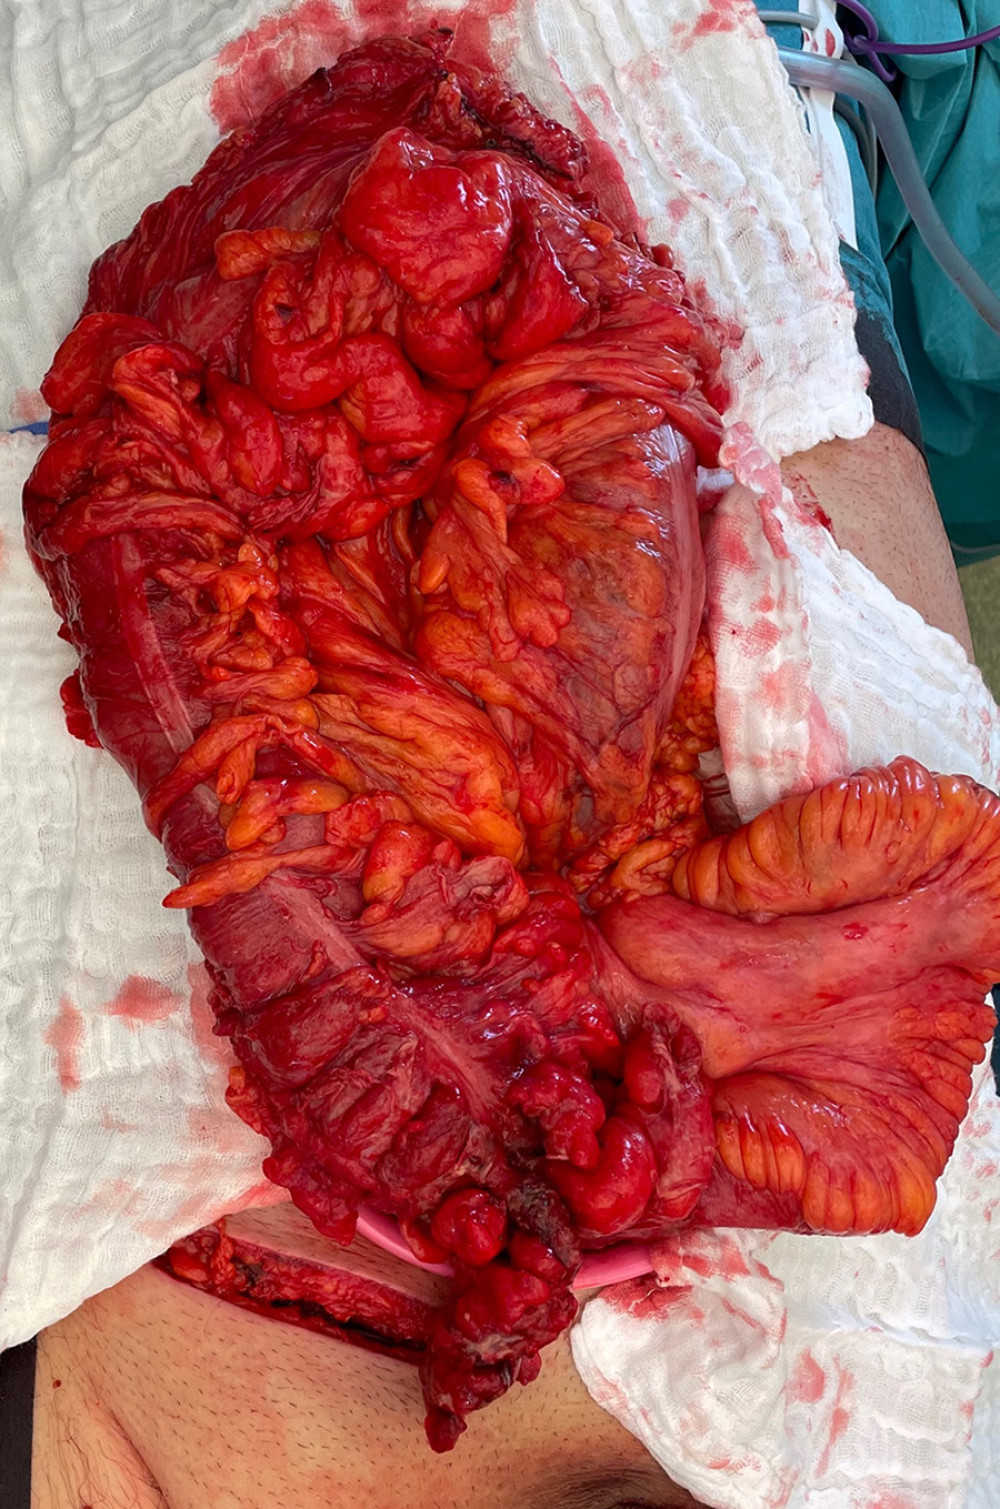 Intraoperative findings: last ileal loop, cecum with perforated appendix, ascending colon, transverse colon, and omentum were found as the contents of the hernia sac.